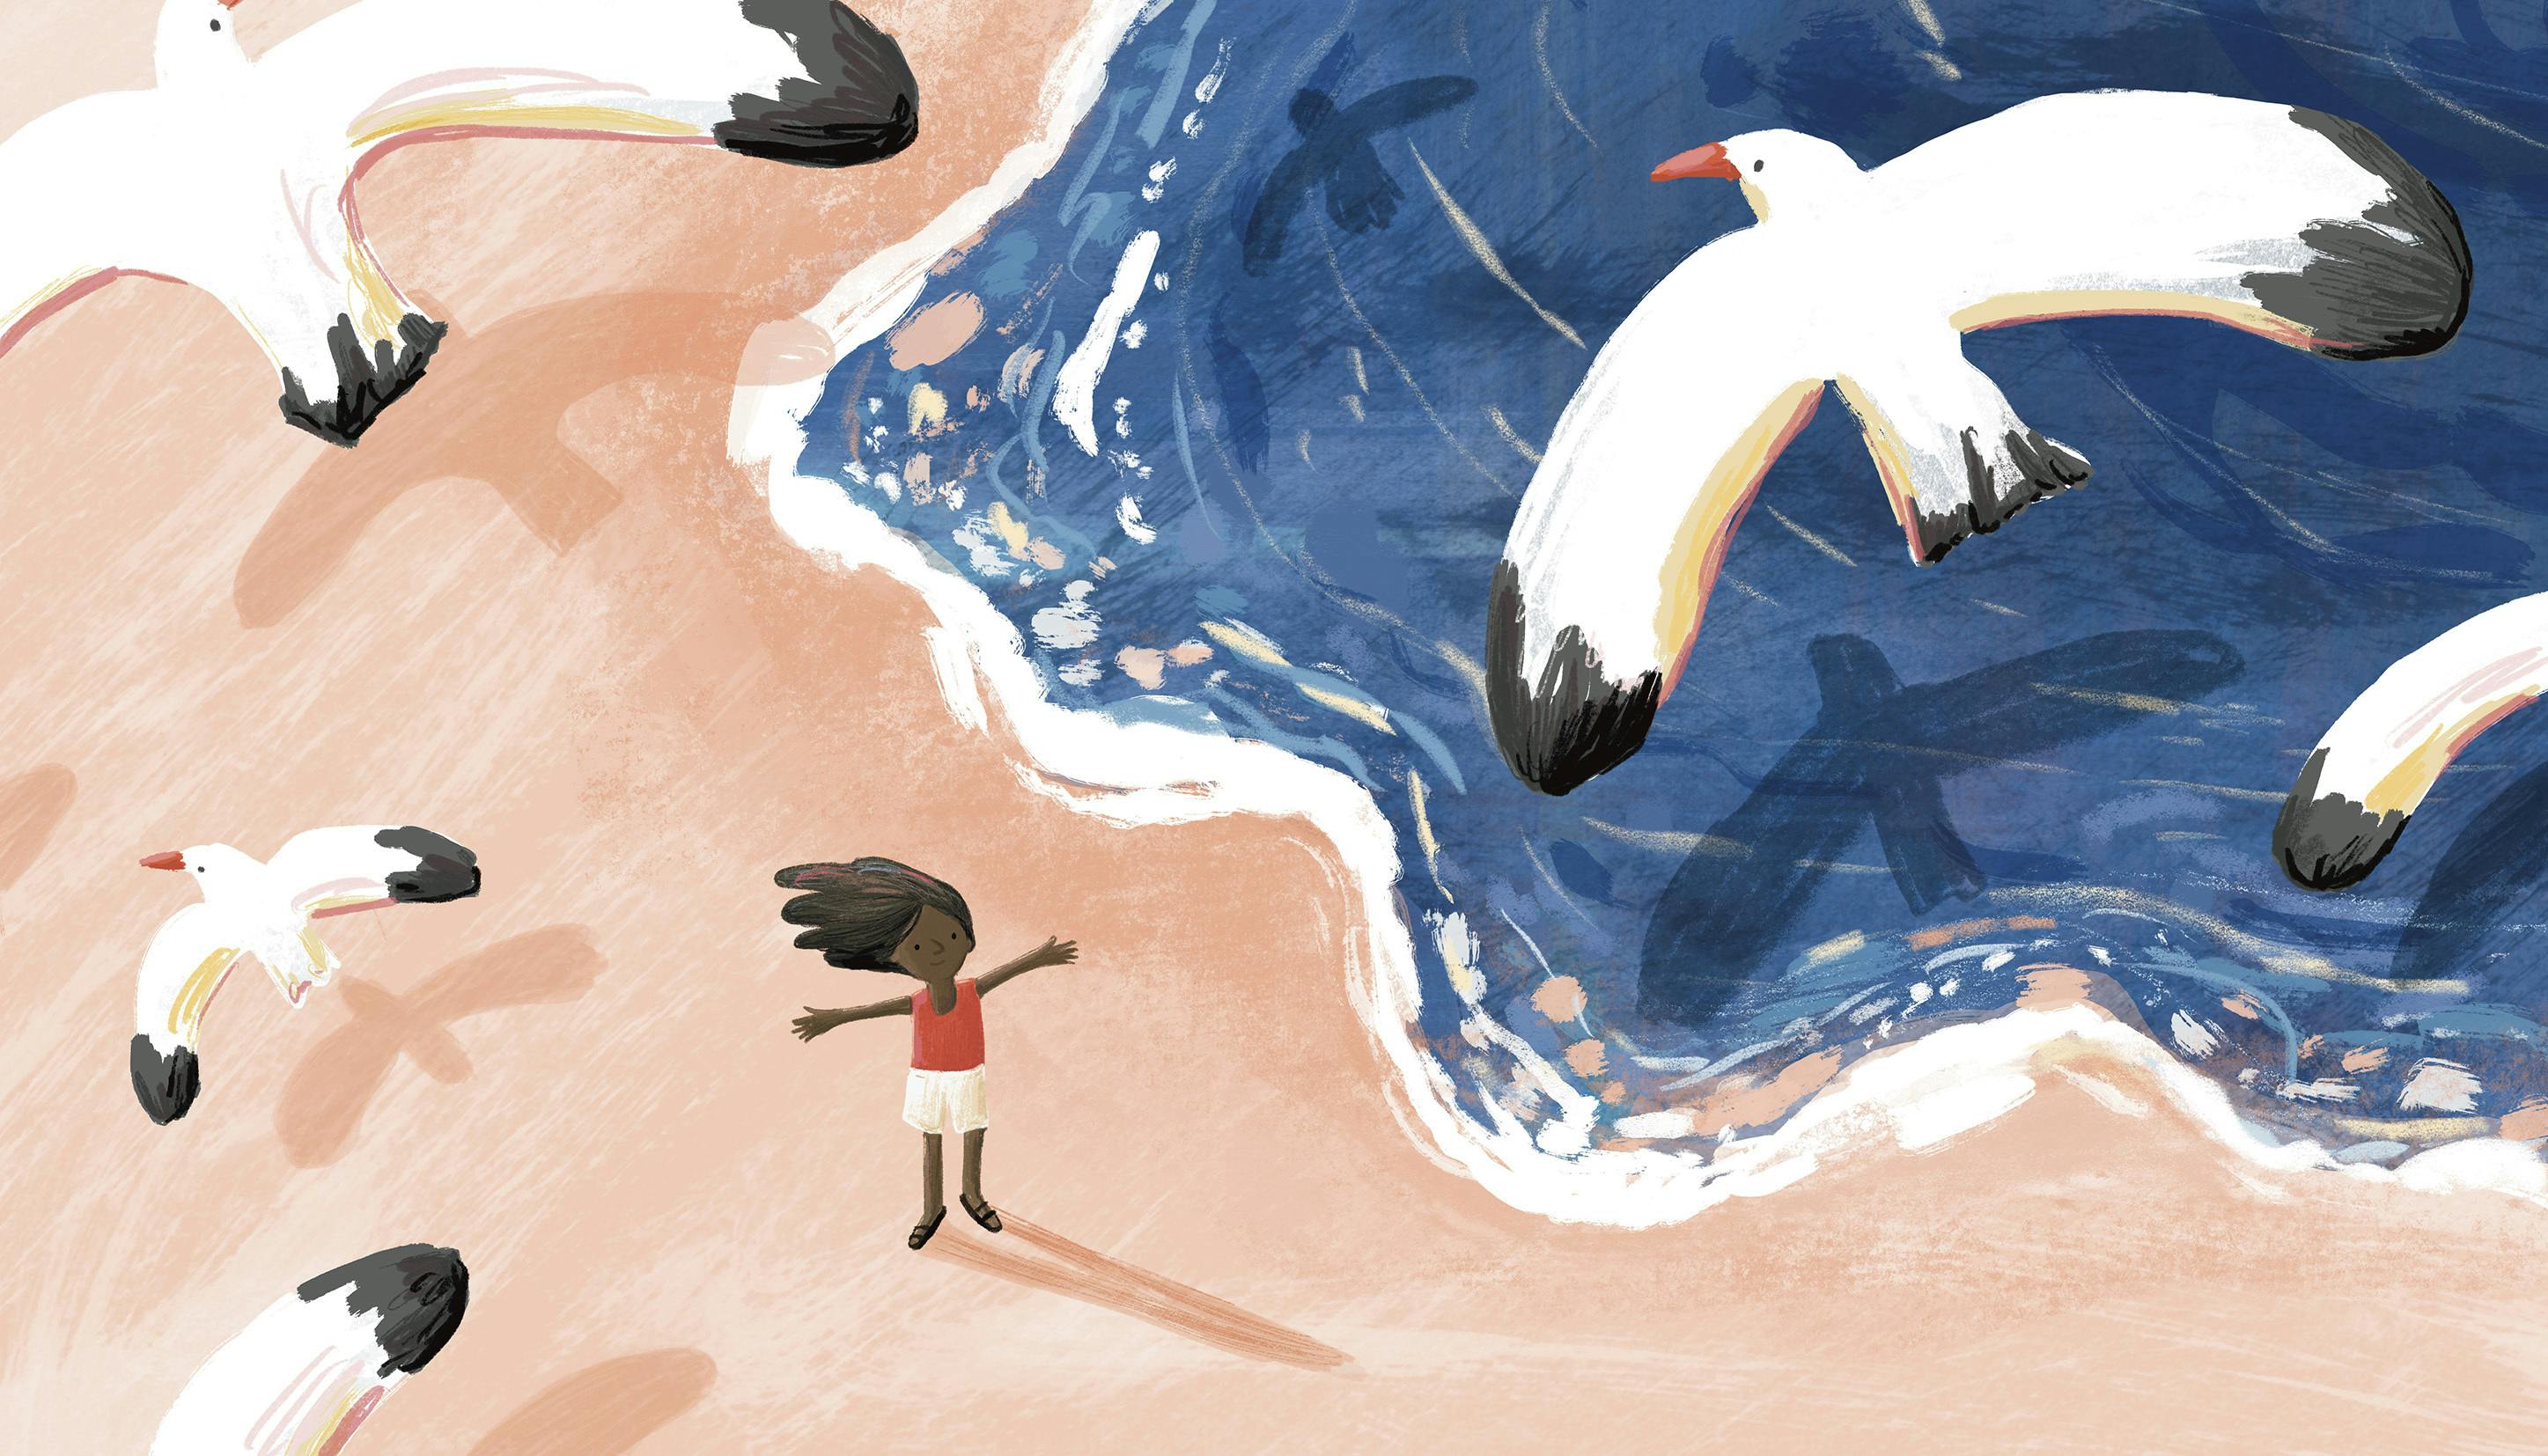 An illustration of seagulls flying over the beach